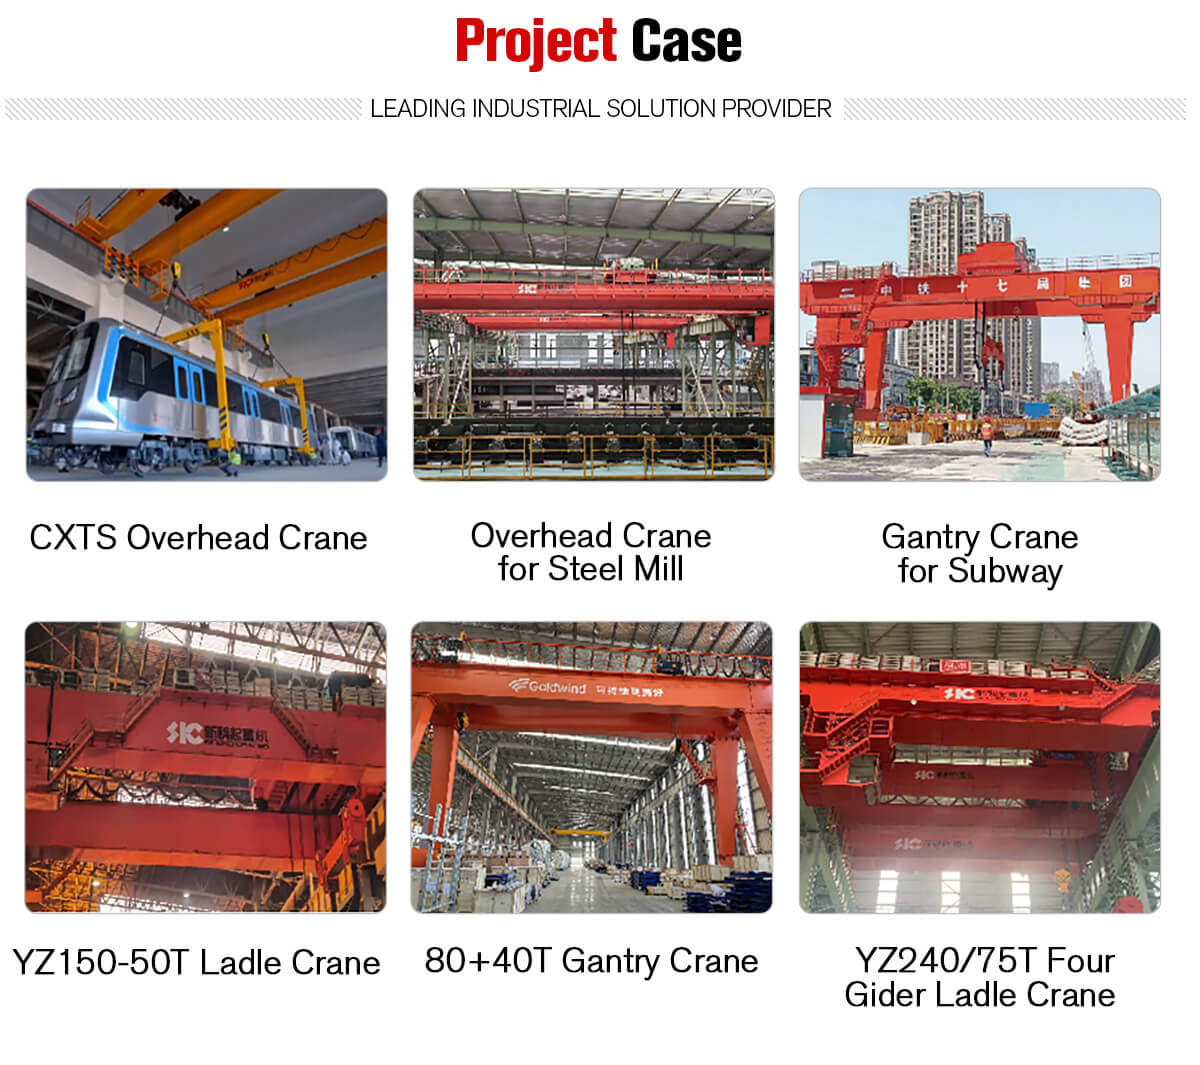 Project Case